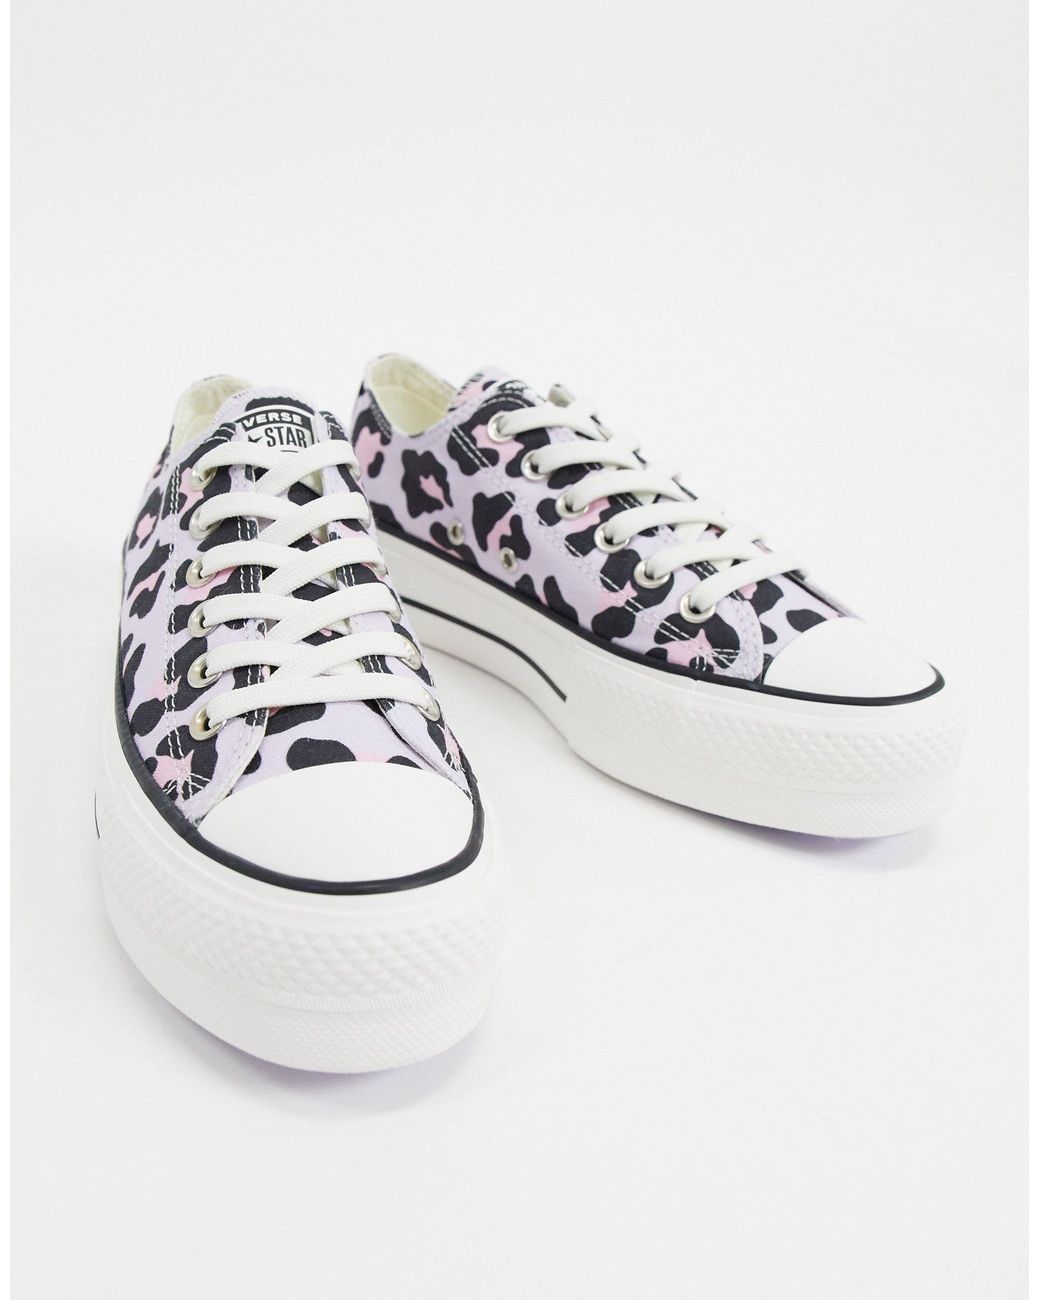 Share 186+ converse leopard print sneakers best